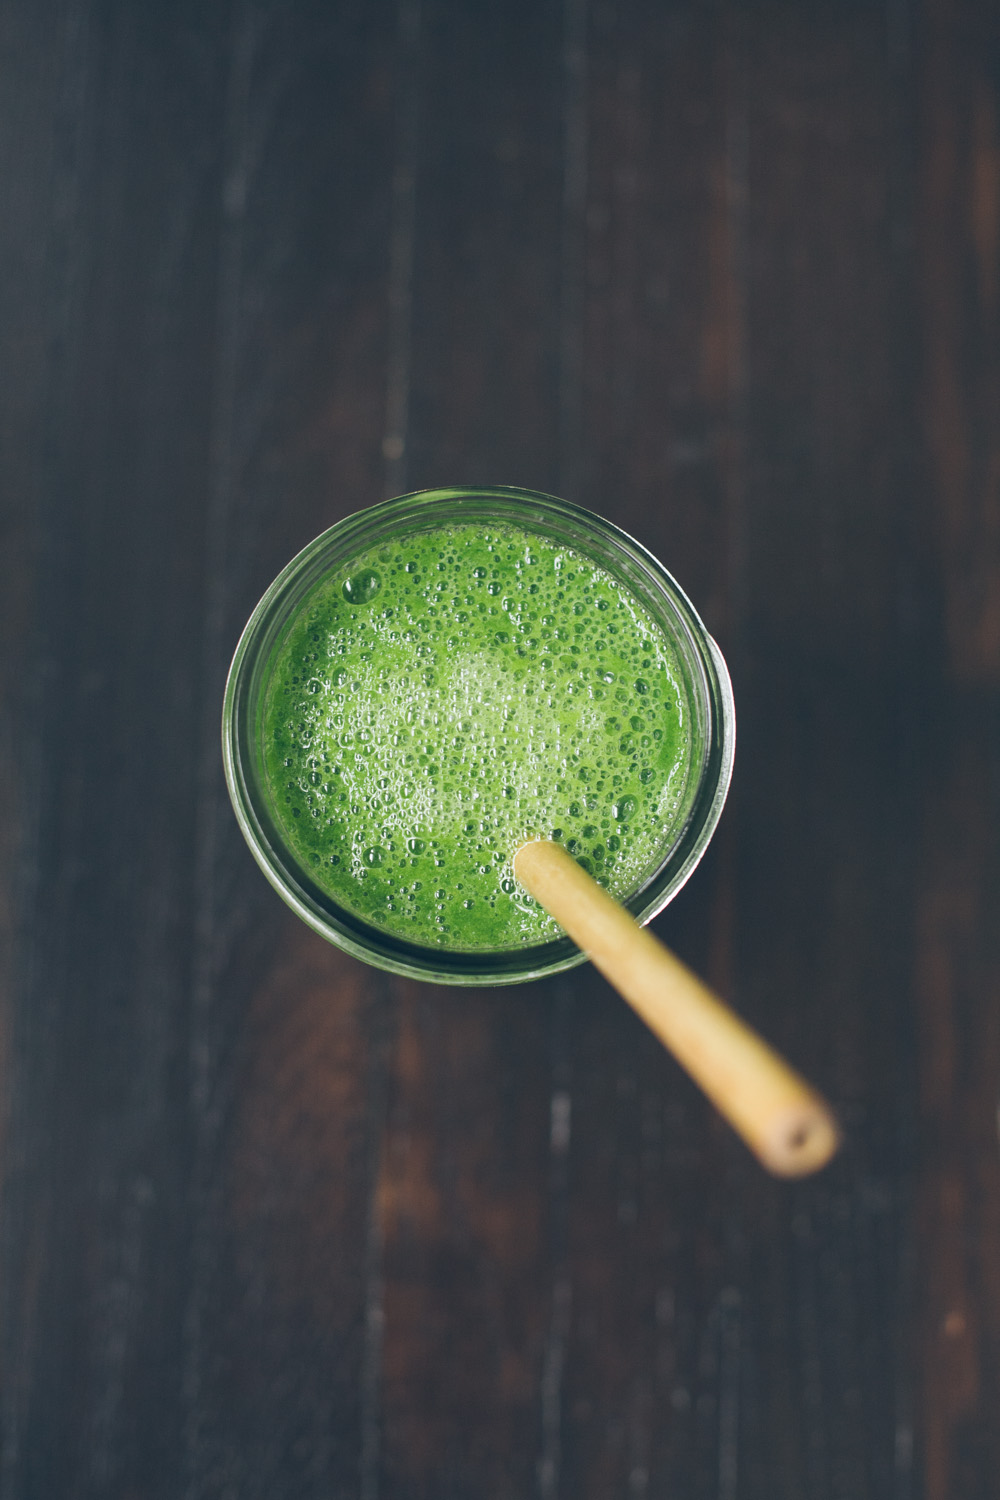 Try this great kale drink, or nine other ideas, posted in this roundup of 10 great recipes on Go Eat Your Bread with Joy.